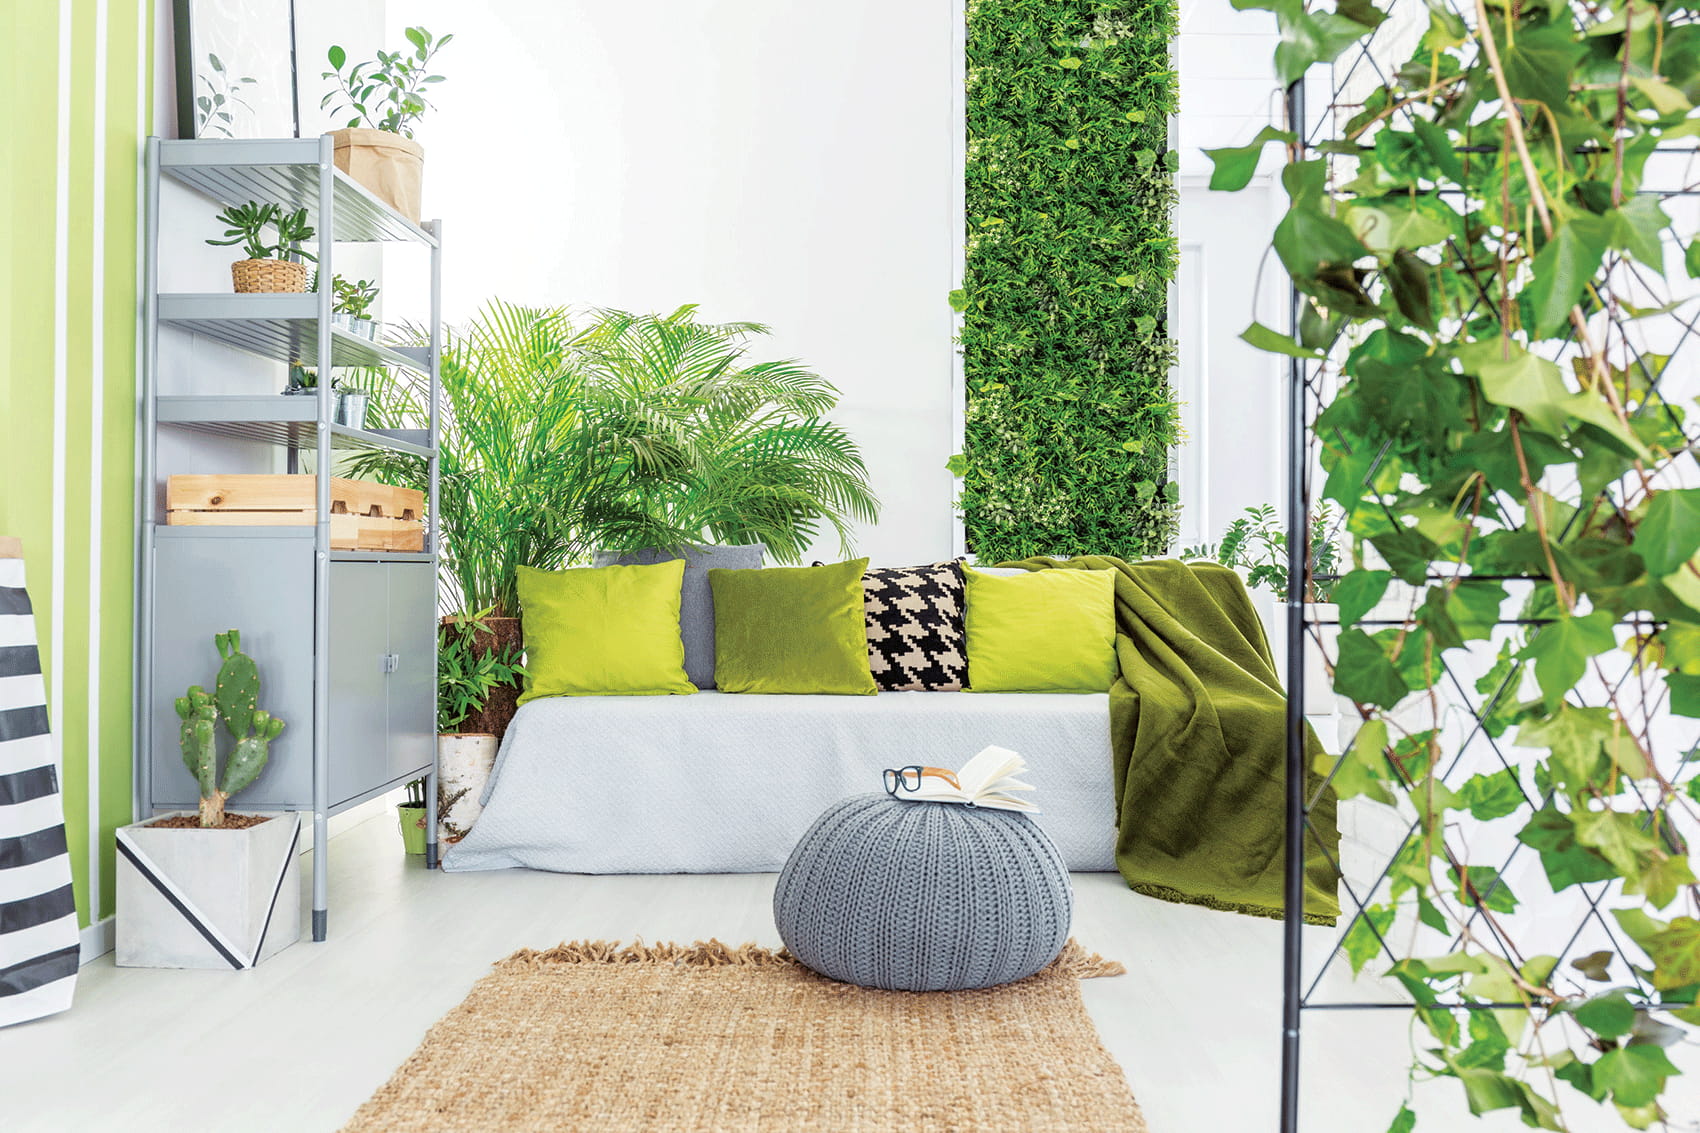 The natural cooling effect of the plants means that you’ll be saving more energy by using less air conditioning.